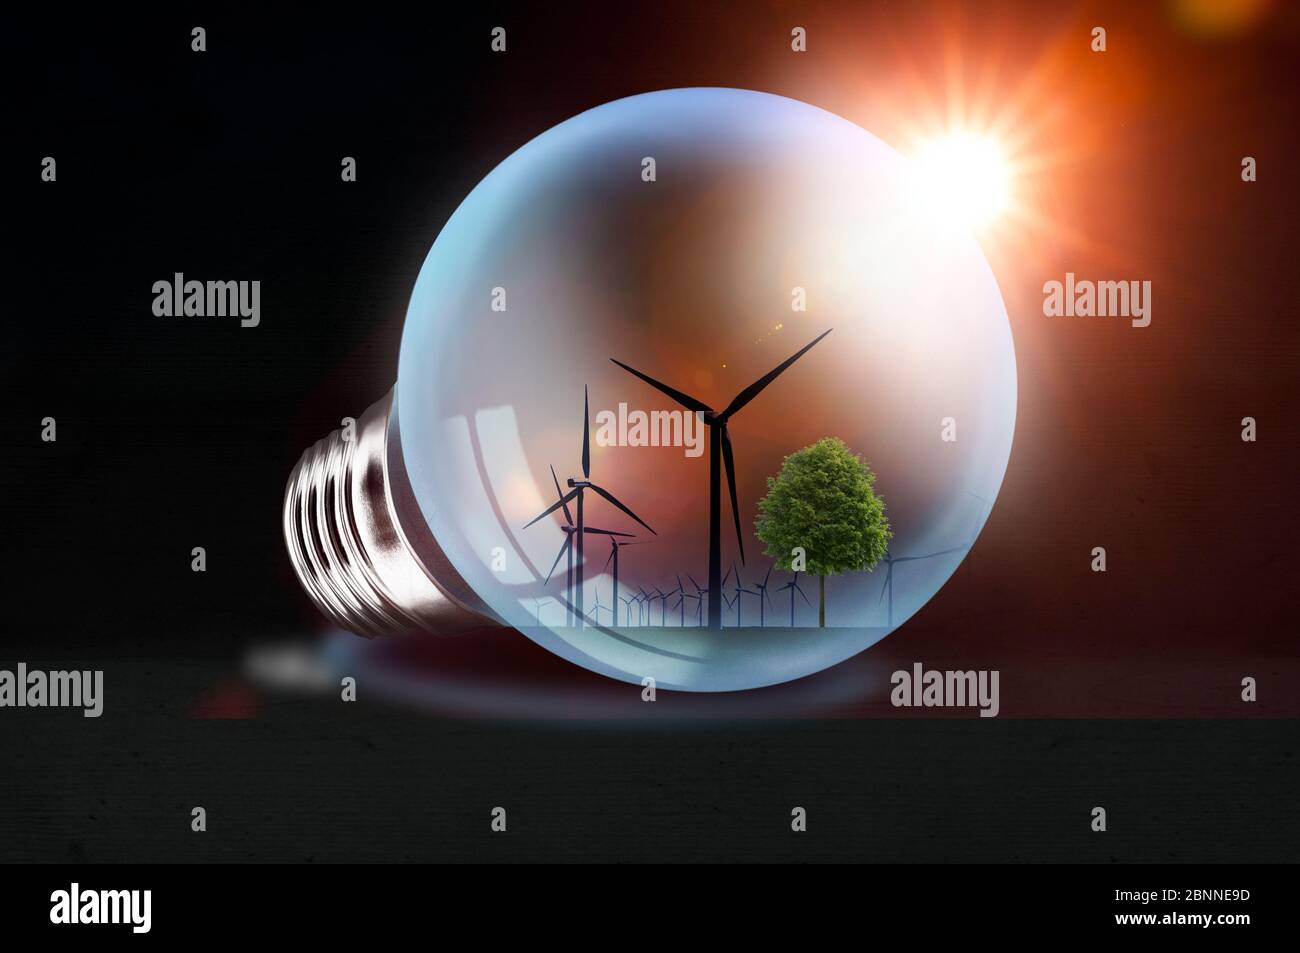 Glowing light bulb on dark background with wind farm reflection - concept Stock Photo